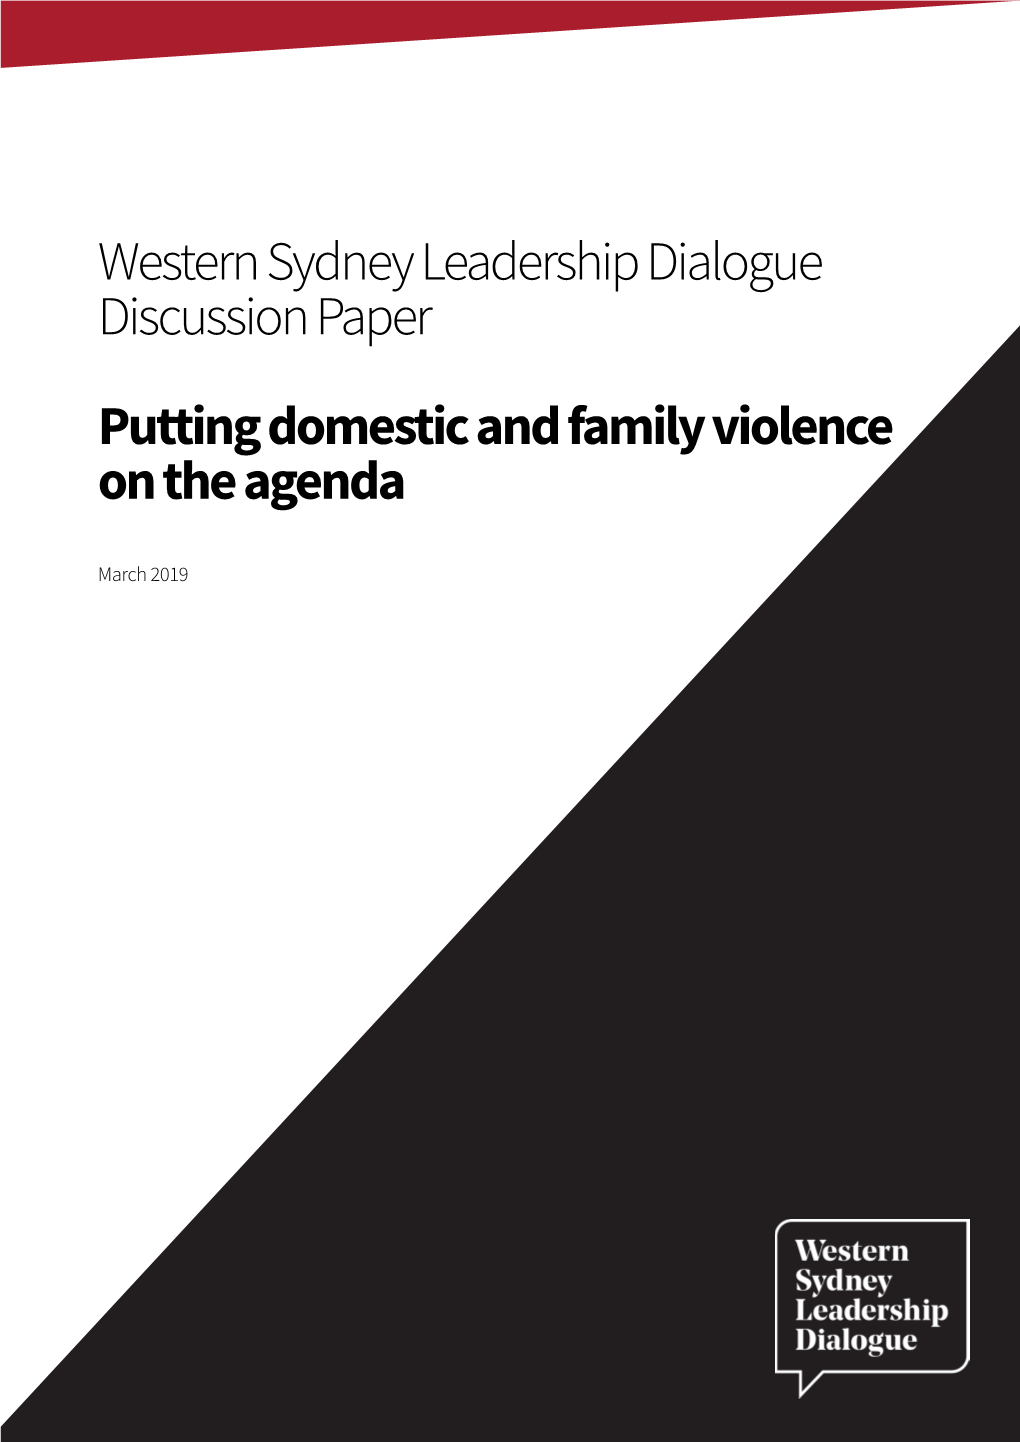 Western Sydney Leadership Dialogue Discussion Paper Putting Domestic and Family Violence on the Agenda